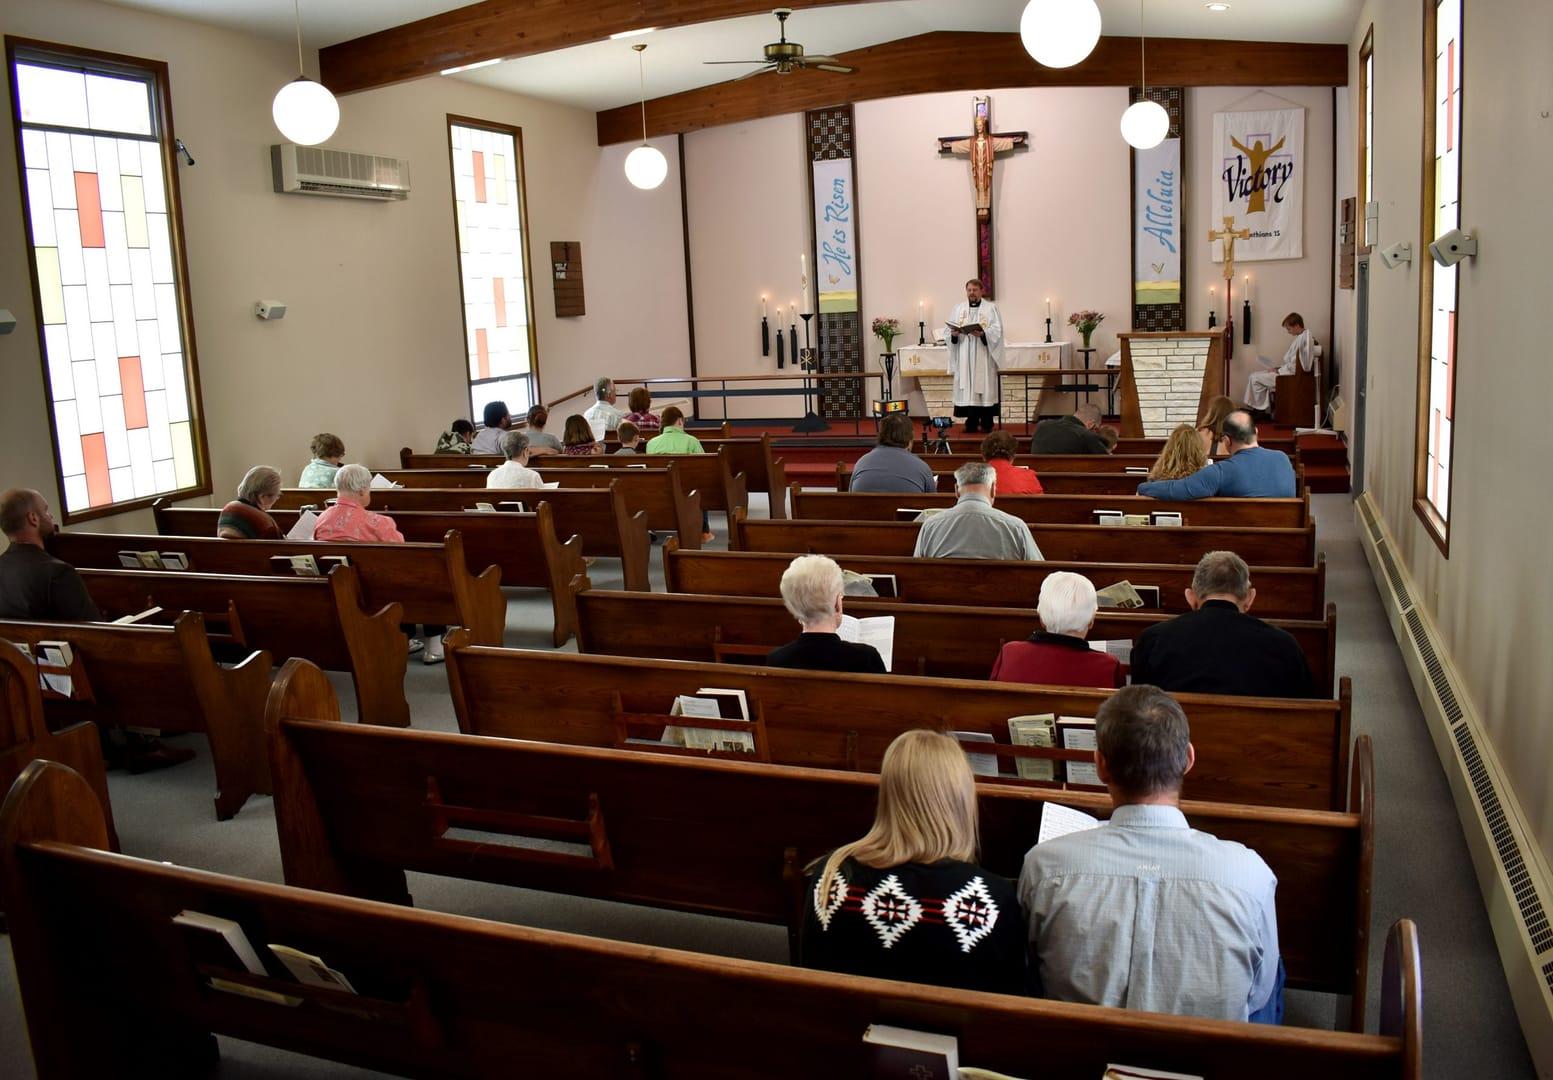 Church services resume as Montana takes first step to reopen